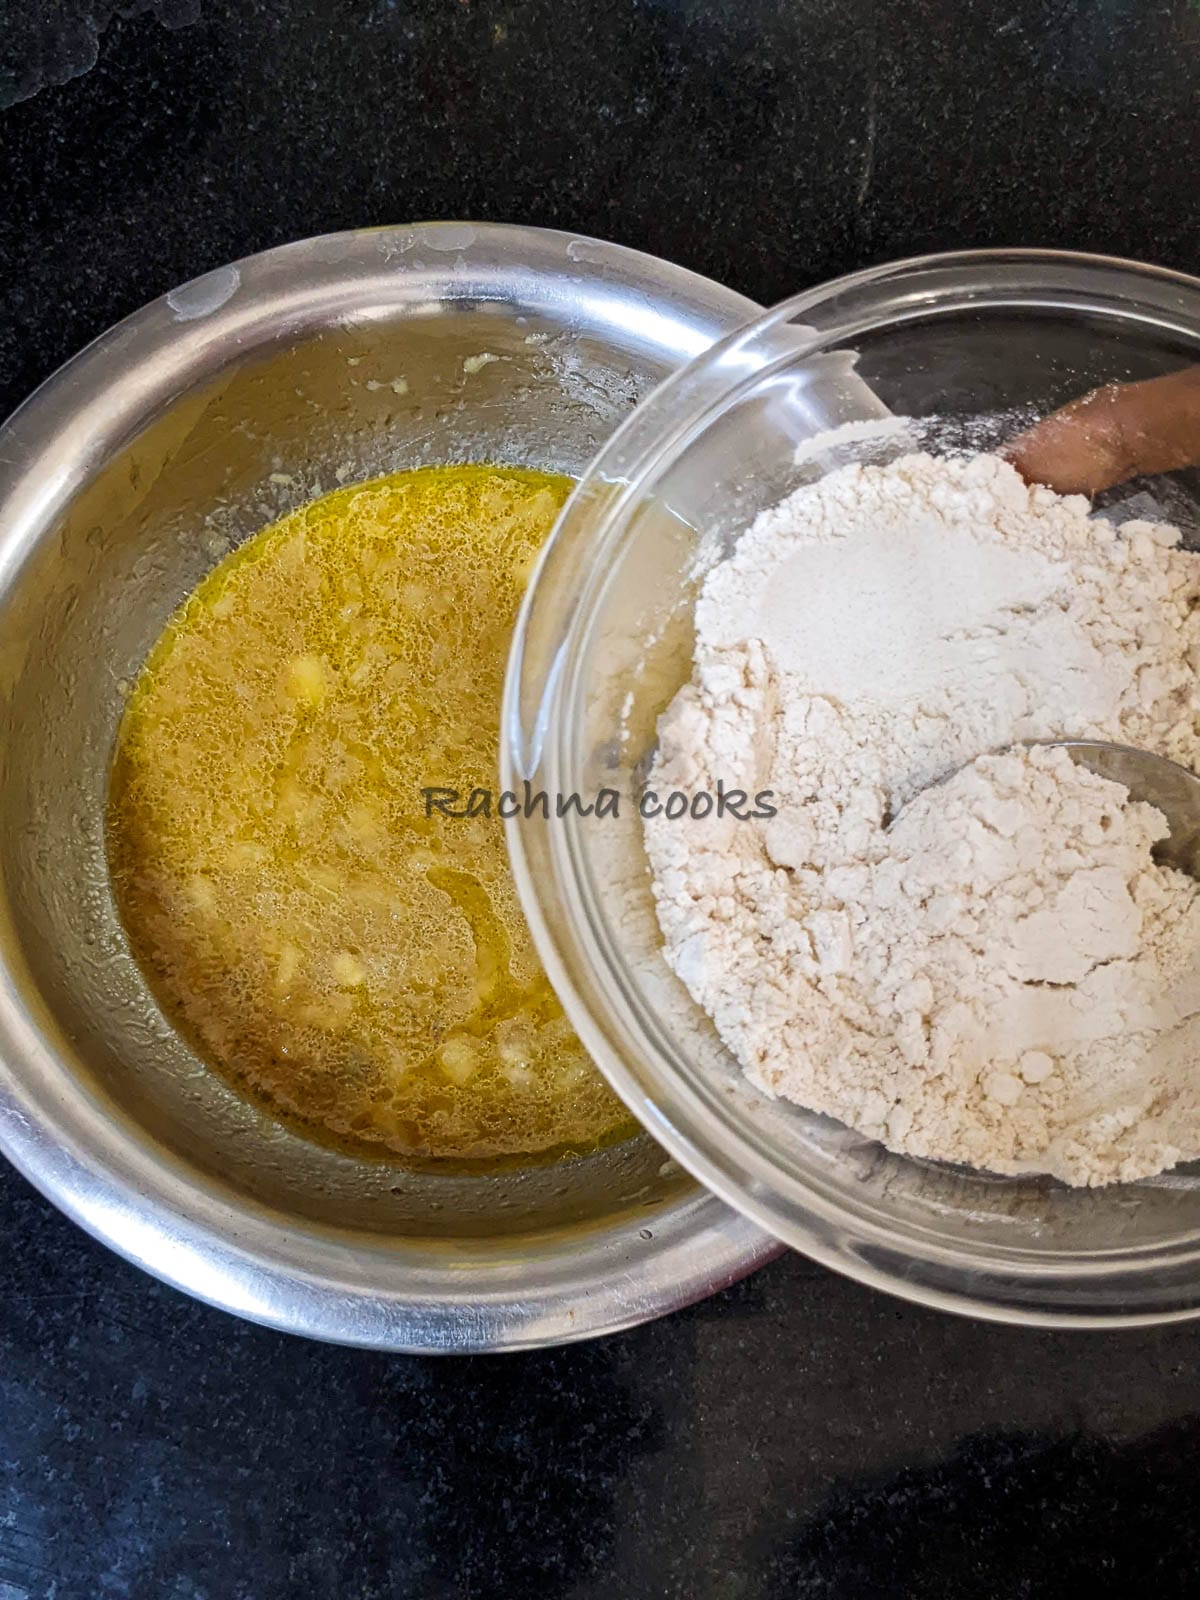 Flour and baking soda mix being added to the wet ingredients.